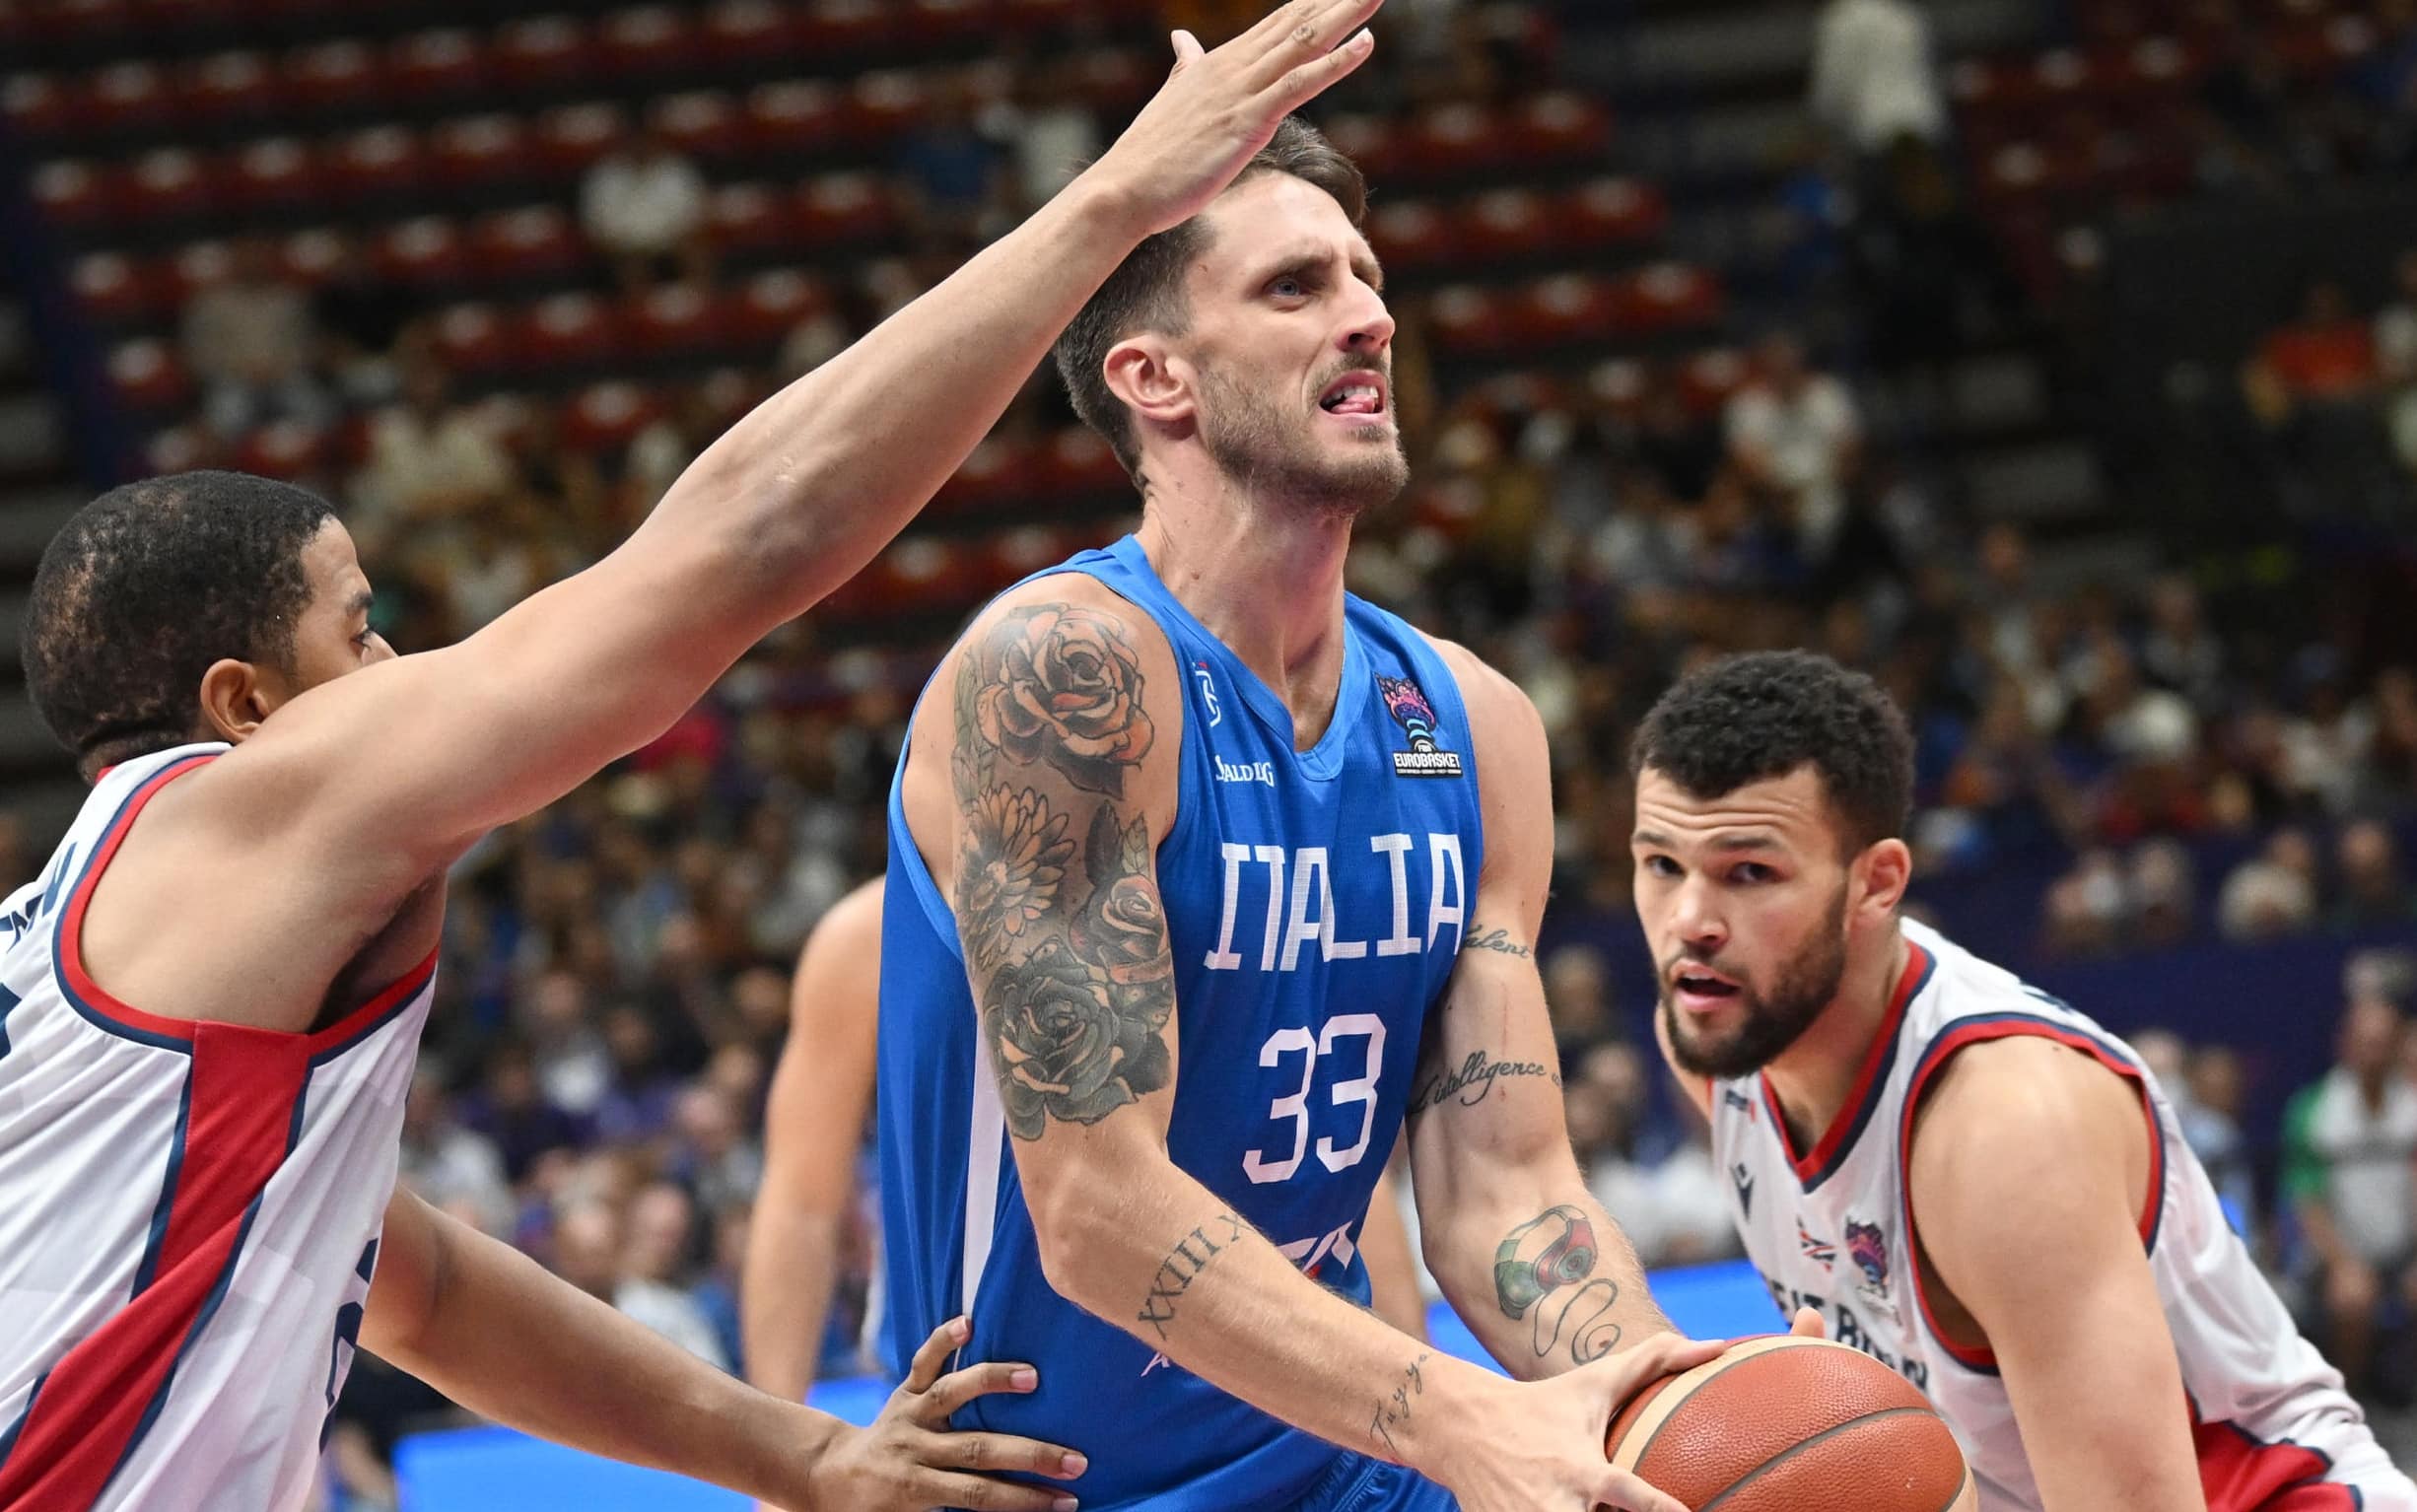 Italy s Achille Polonara (C) goes for a basket against Great Britain s Myles Hesson (L) and teammate Luke Nelson during their FIBA EuroBasket 2022 group C stage match at the Assago Forum, in Assago, near Milan, Italy 8 September 2022. ANSA/DANIEL DAL ZENNARO